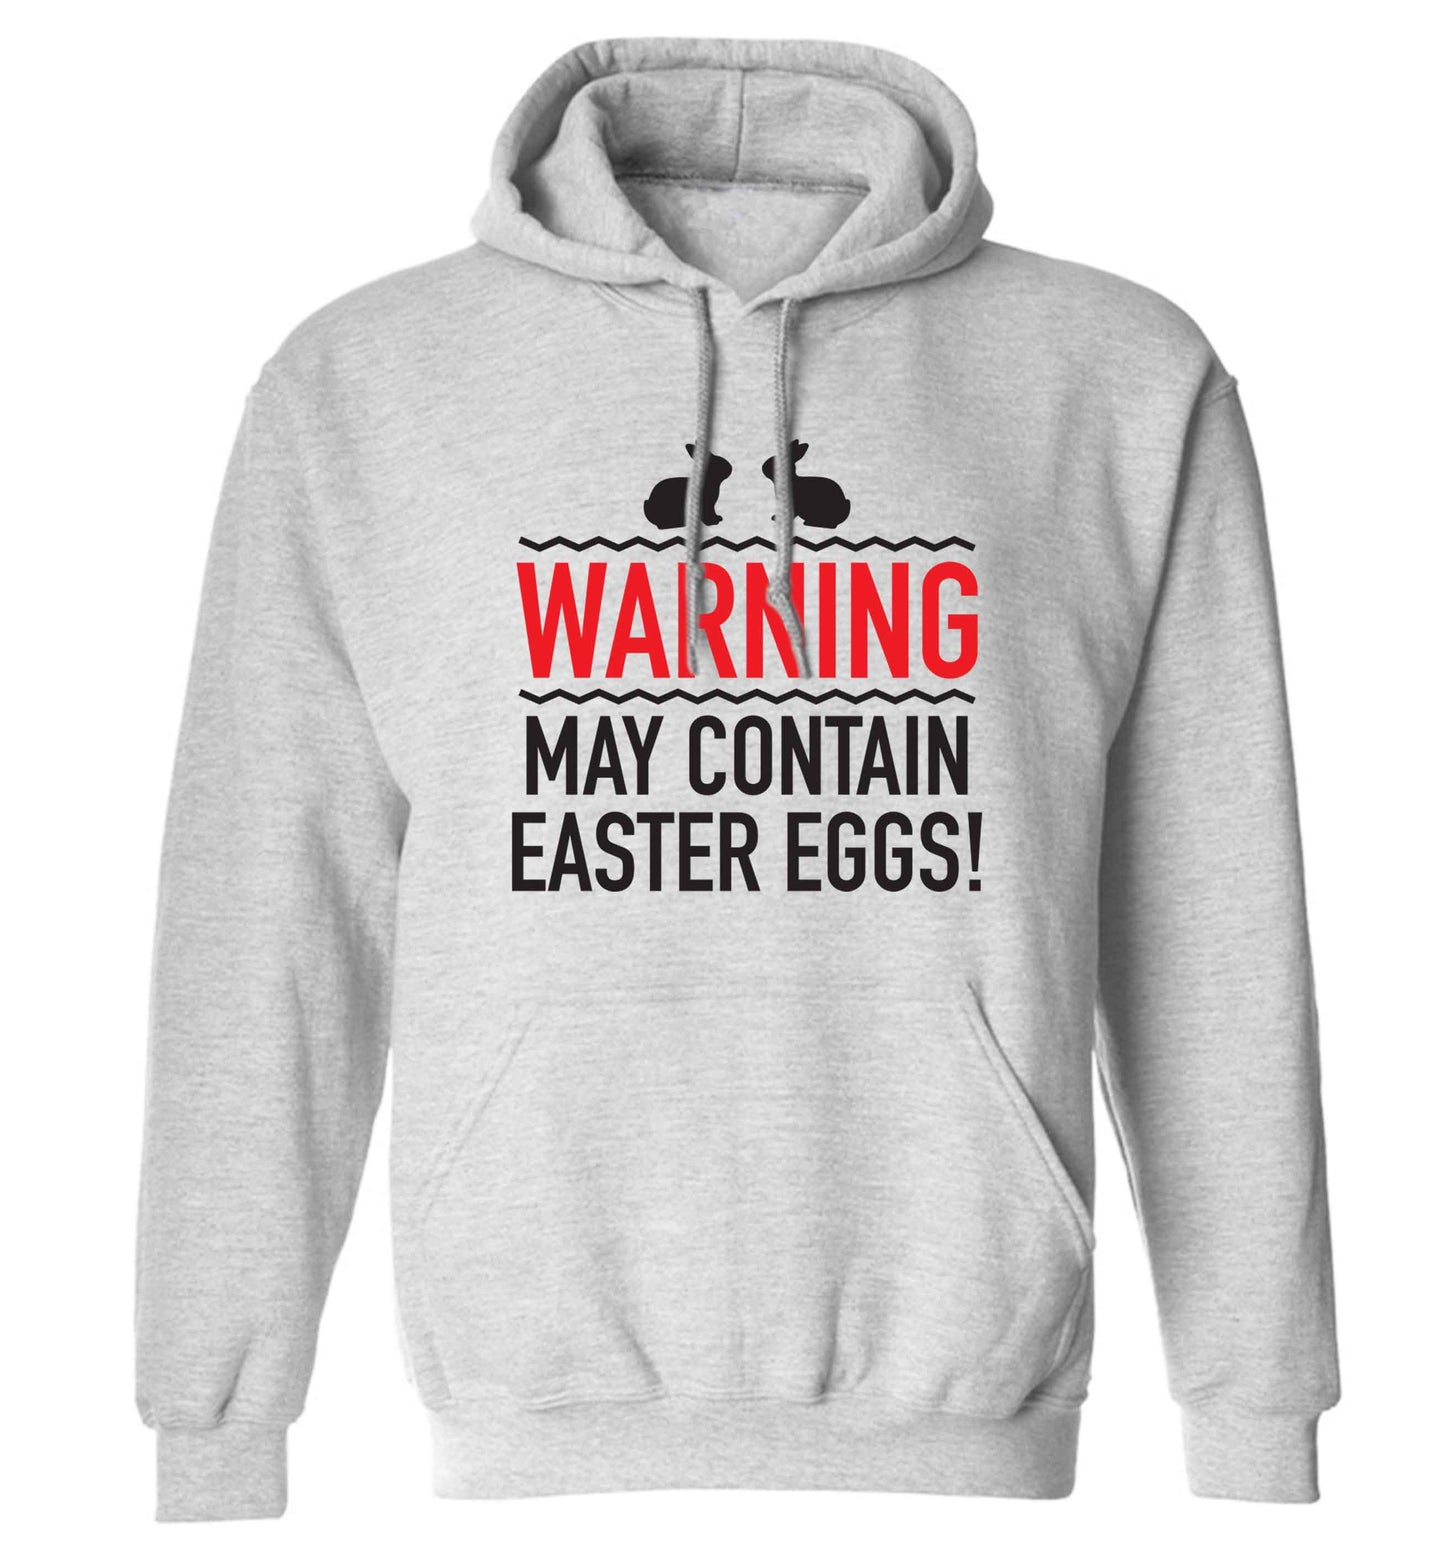 Warning may contain Easter eggs adults unisex grey hoodie 2XL